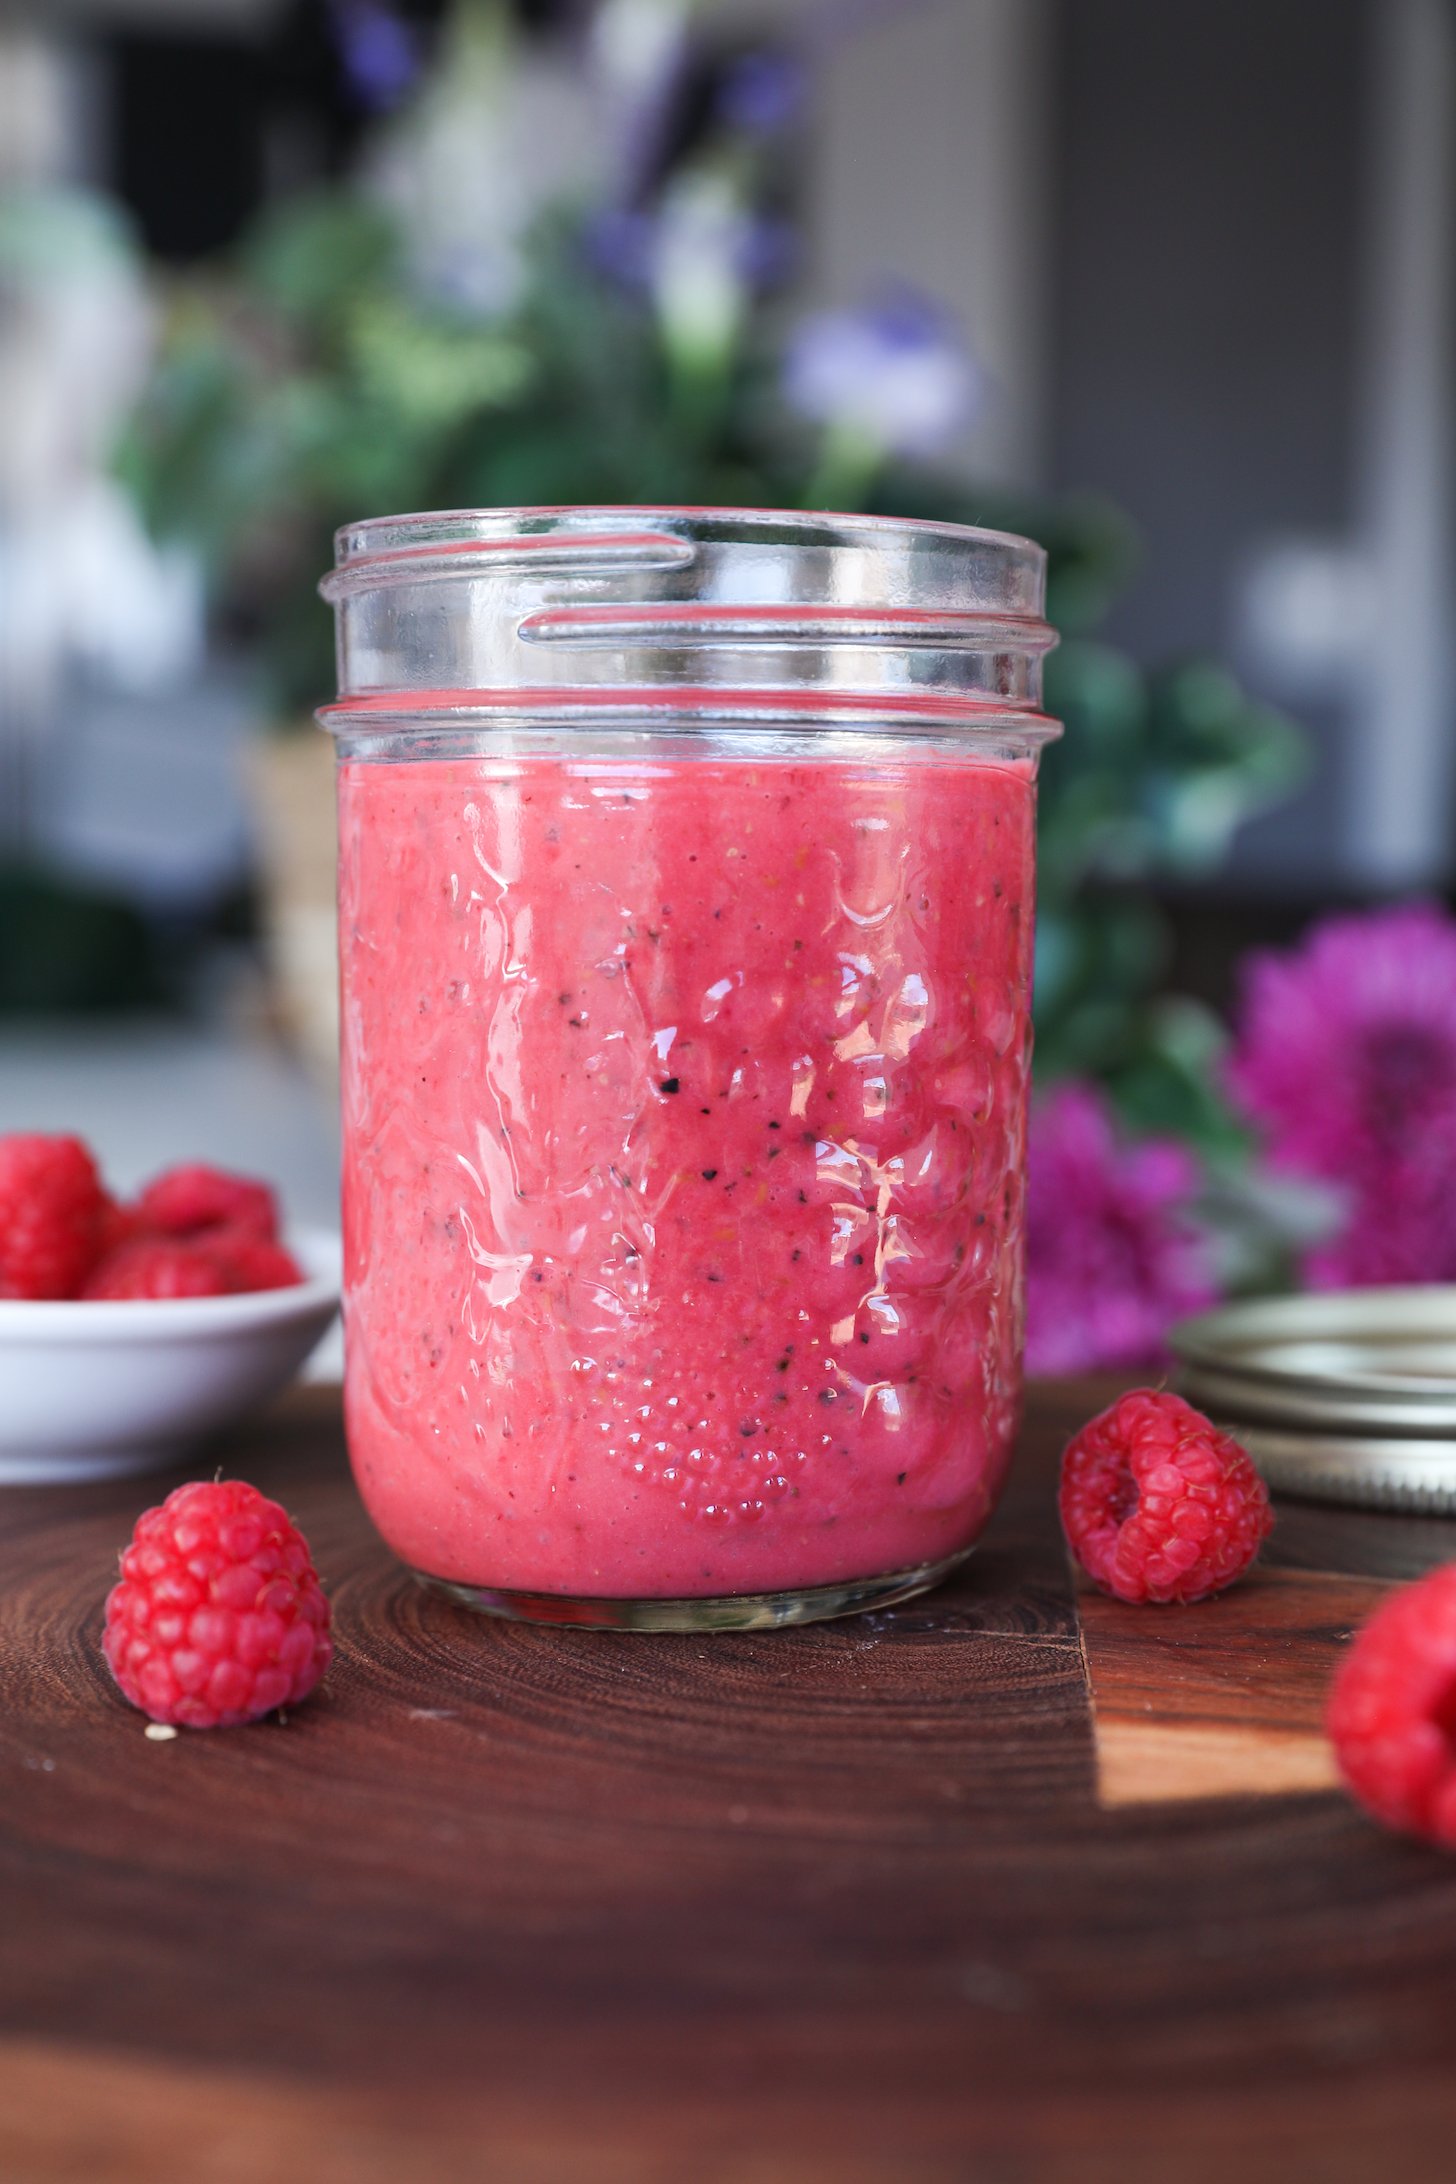 A perspective image of a mason jar of red sauce or dressing on a brown surface with several raspberries nearby.